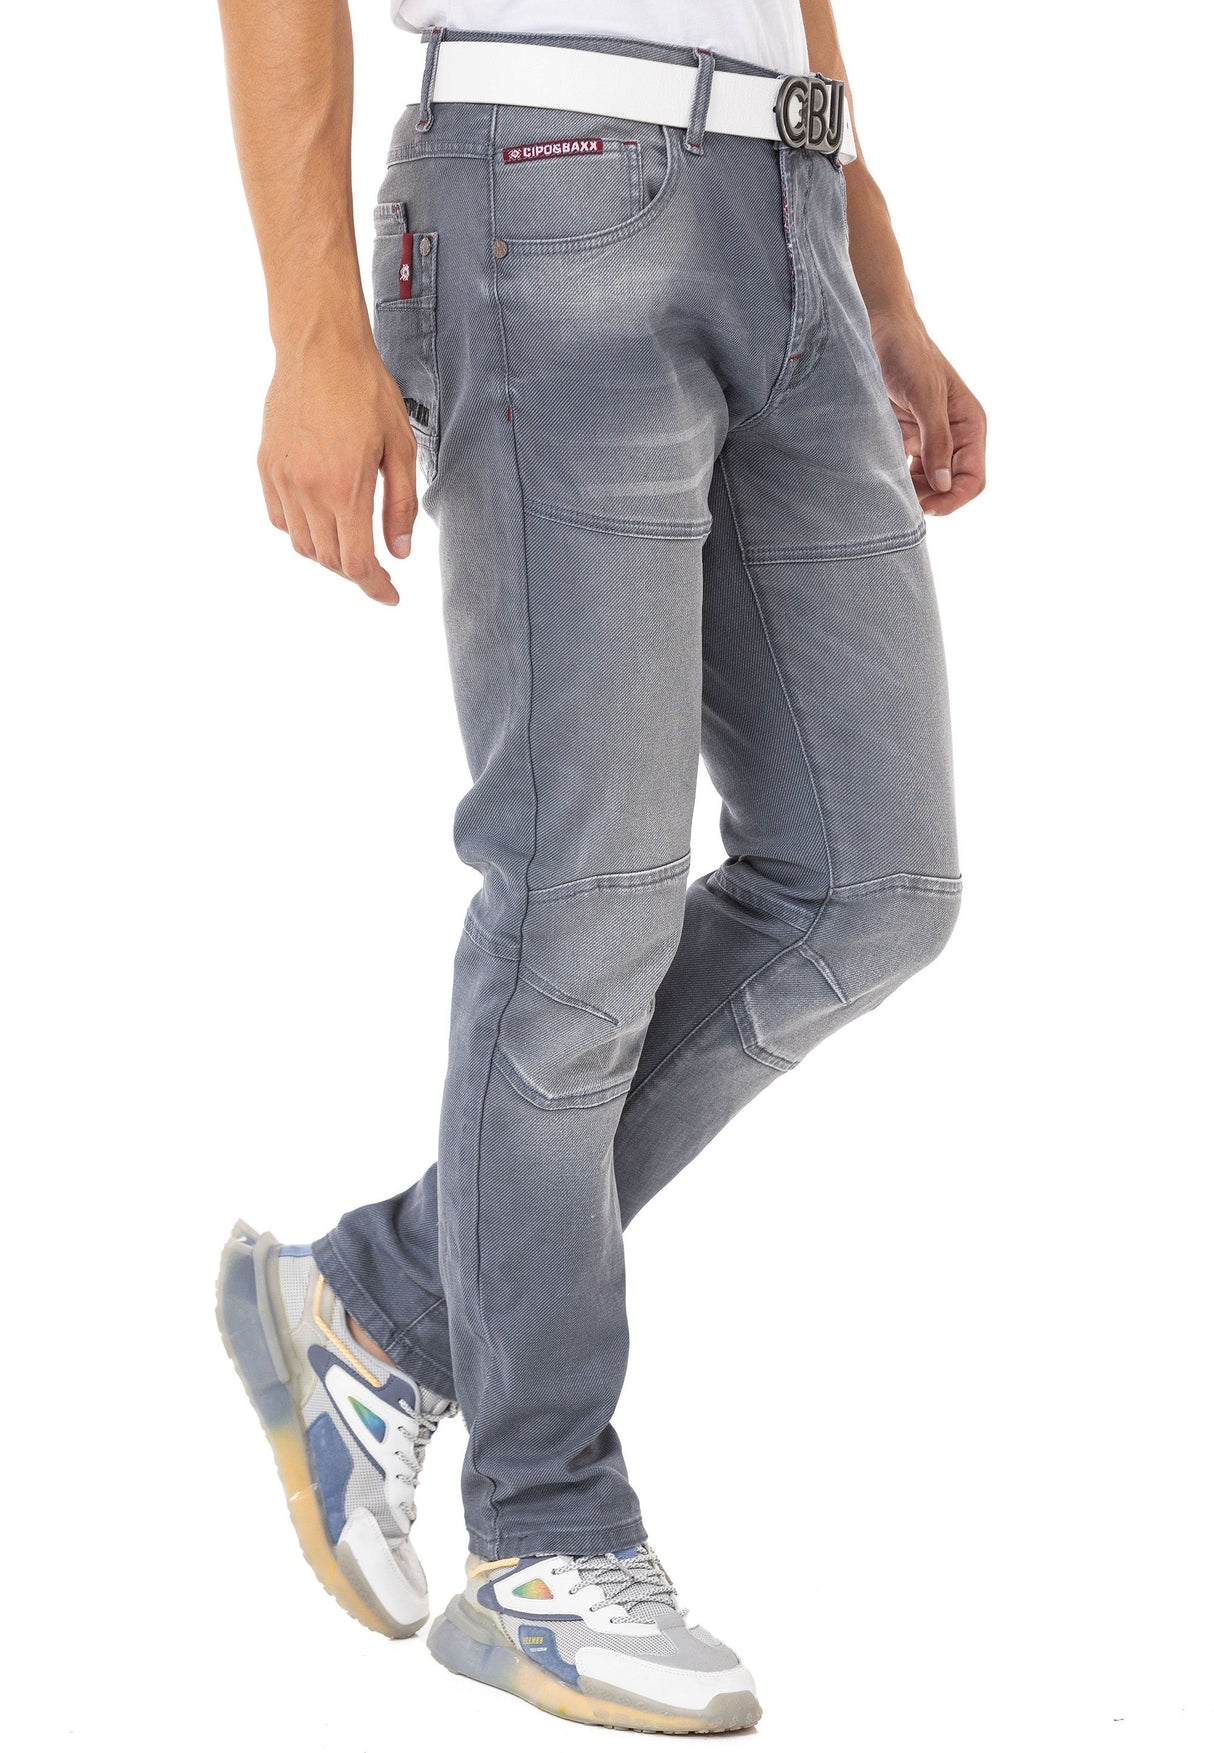 CD699 men's straight fit jeans with a cool used wash